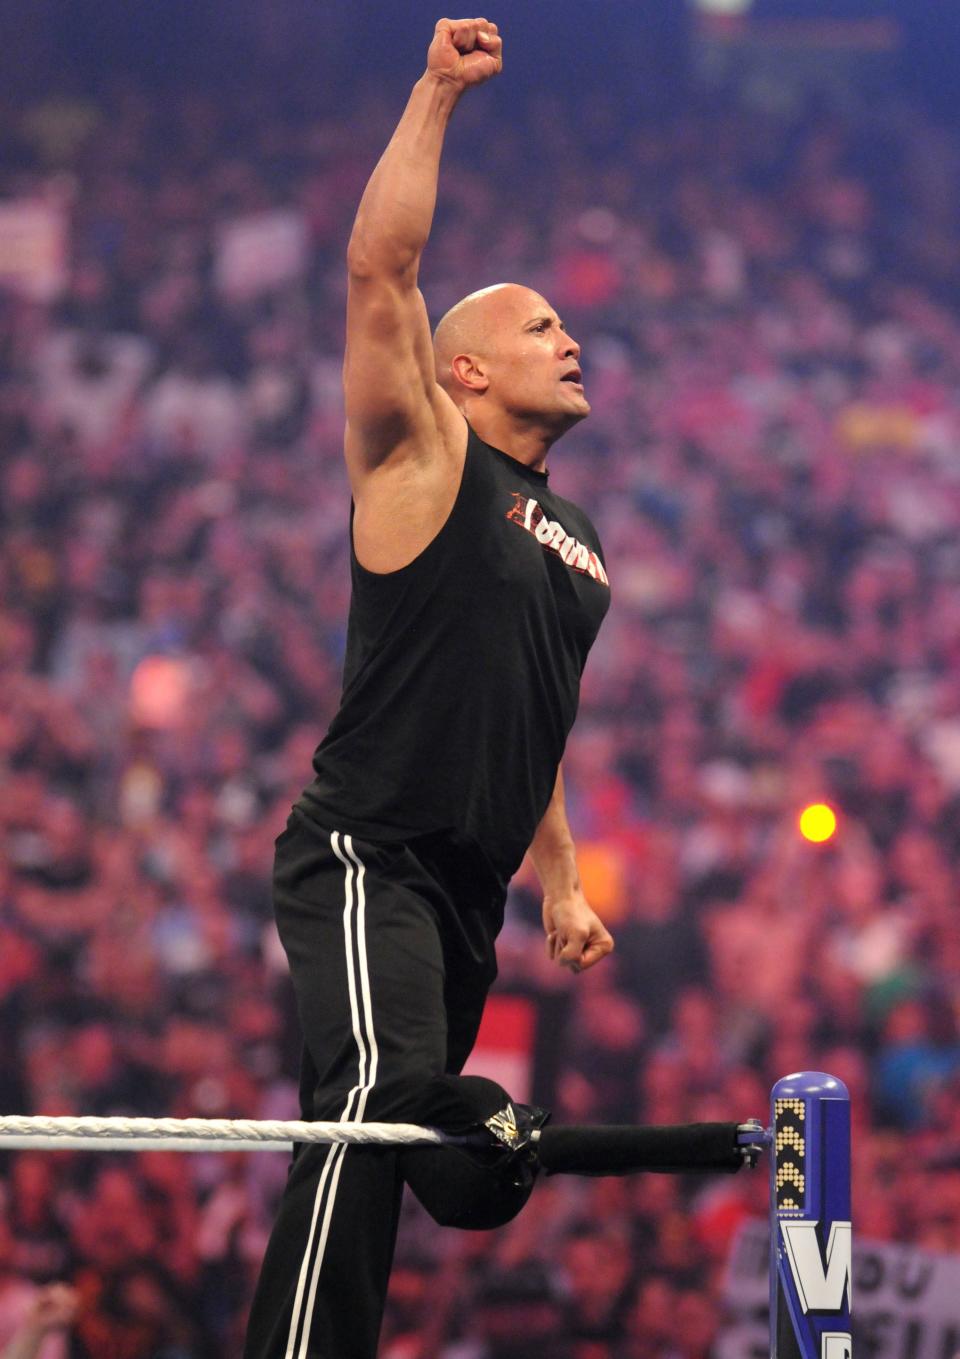 Dwayne "The Rock" Johnson at the WWE in 2011